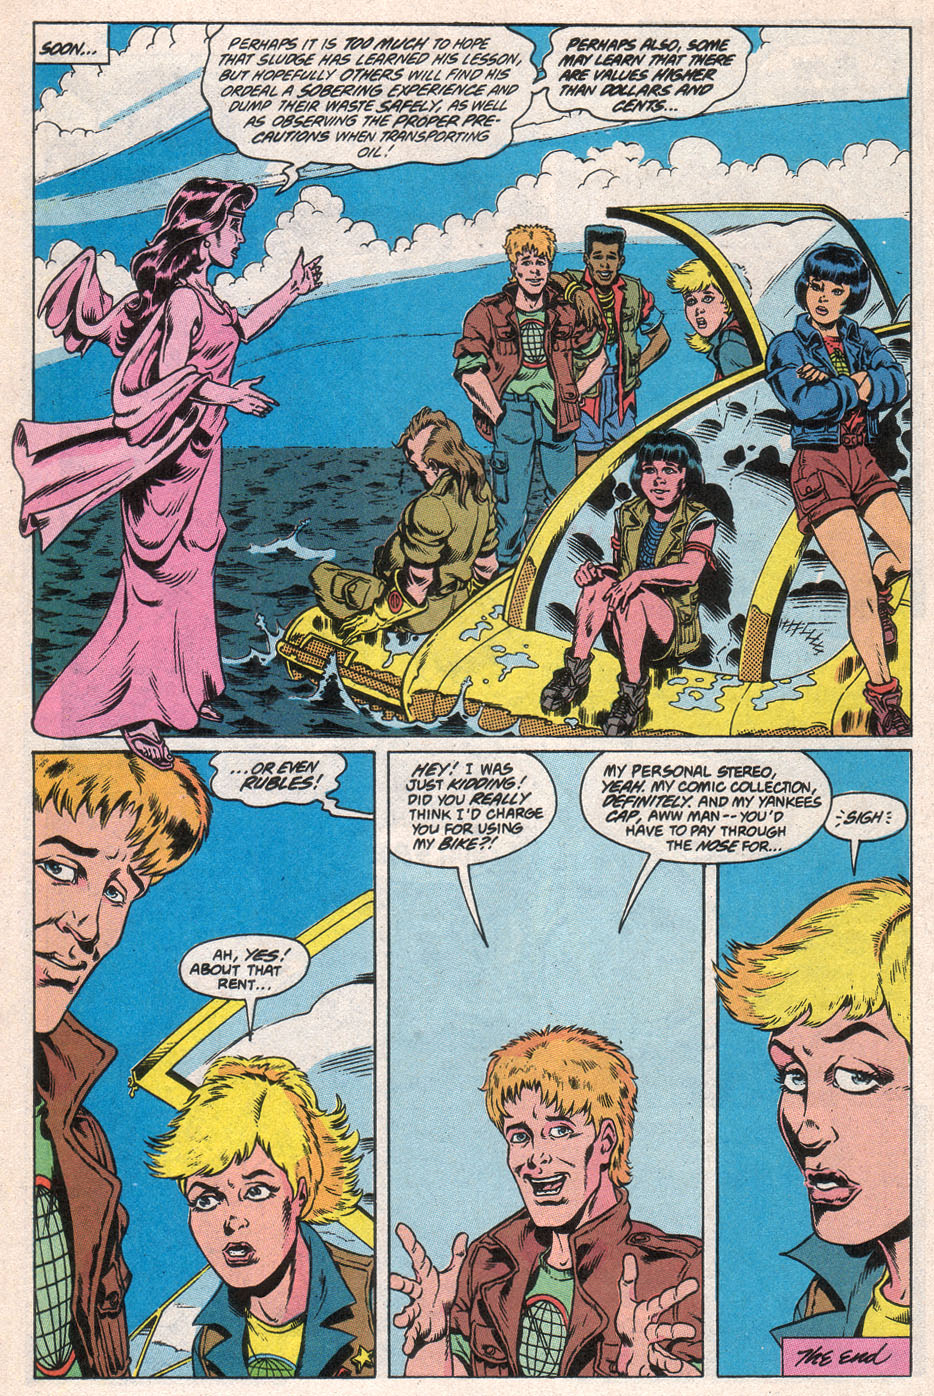 Captain Planet and the Planeteers 10 Page 13